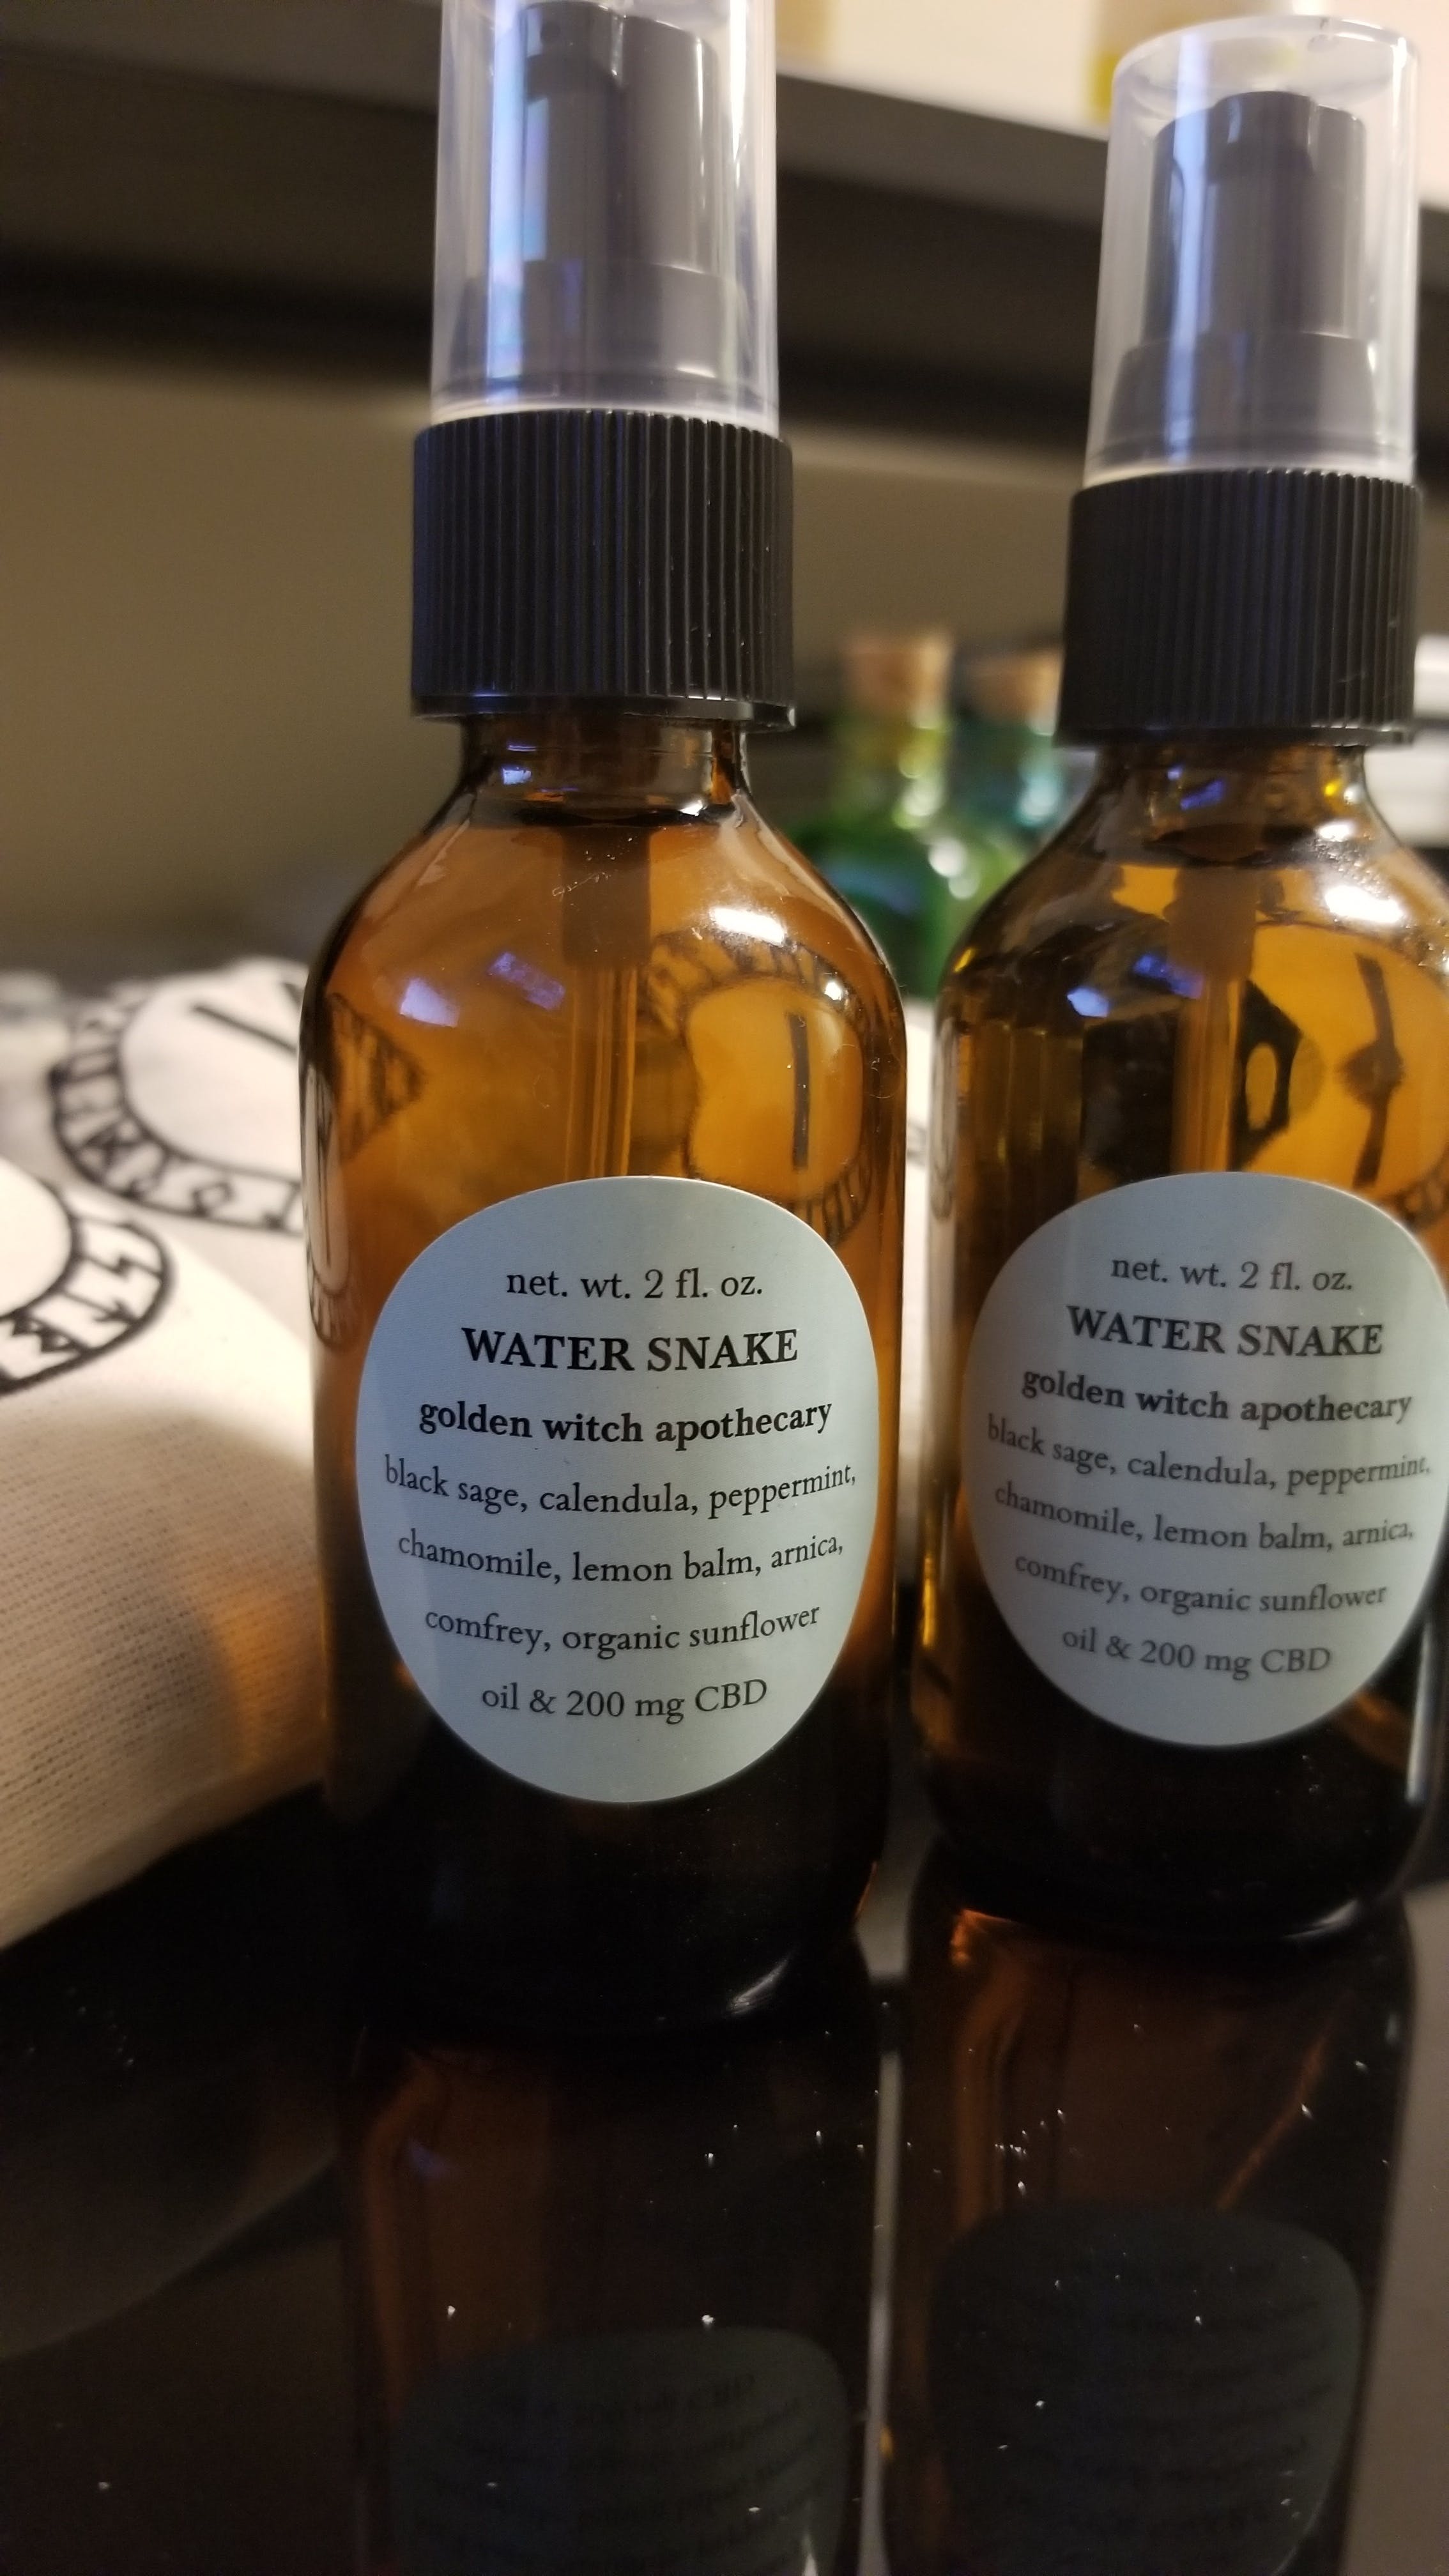 topicals-golden-witch-apothocary-water-snake-oil-spray-200mg-cbd